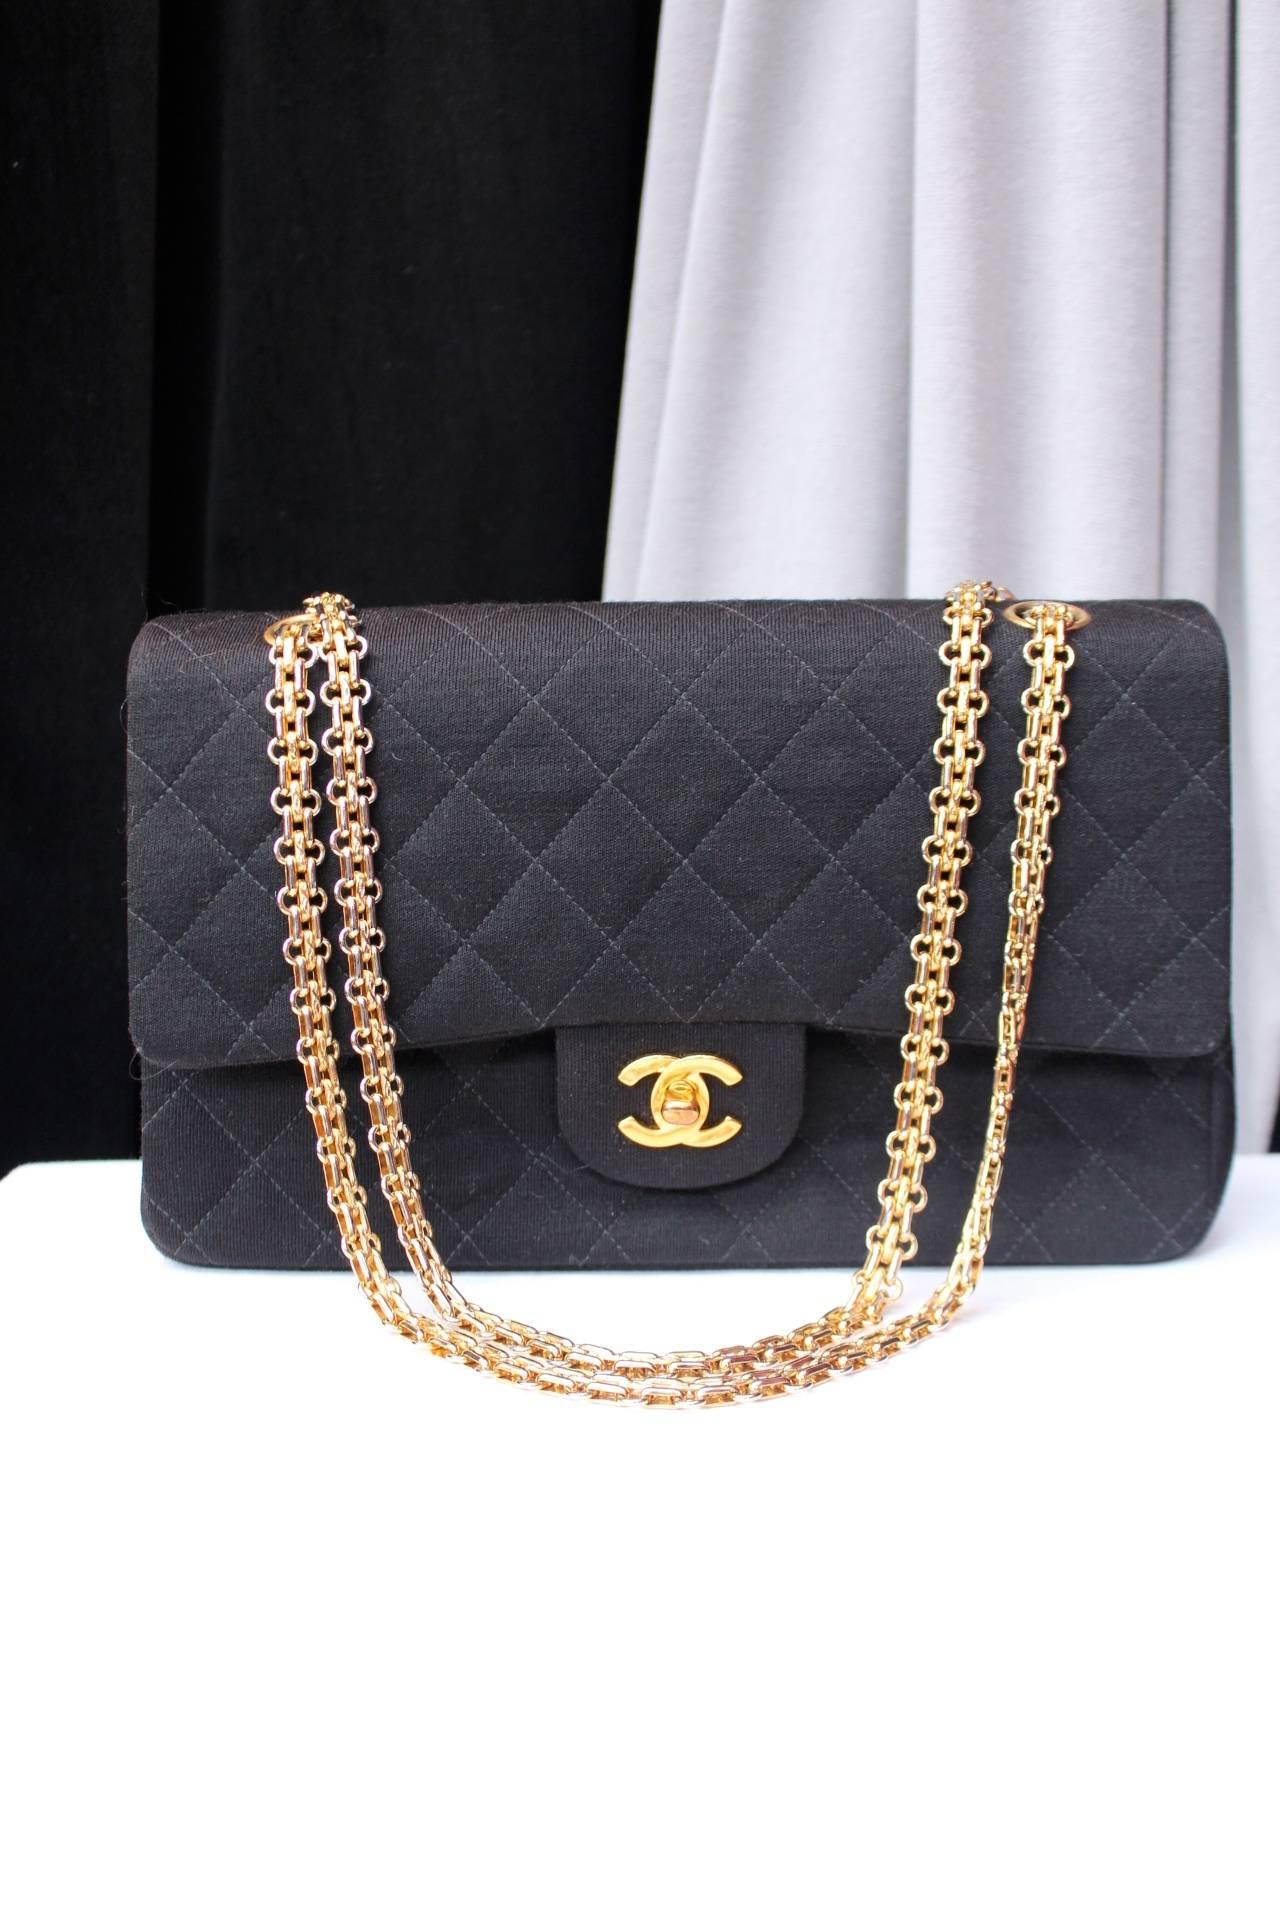 CHANEL Vintage timeless shoulder bag made with black quilted jersey and a beautiful gilt metal chain and a CC logo turnlock clasp. 
Double flap with red leather inner lining. 

One zip pocket in the front flap and two small pockets in the main